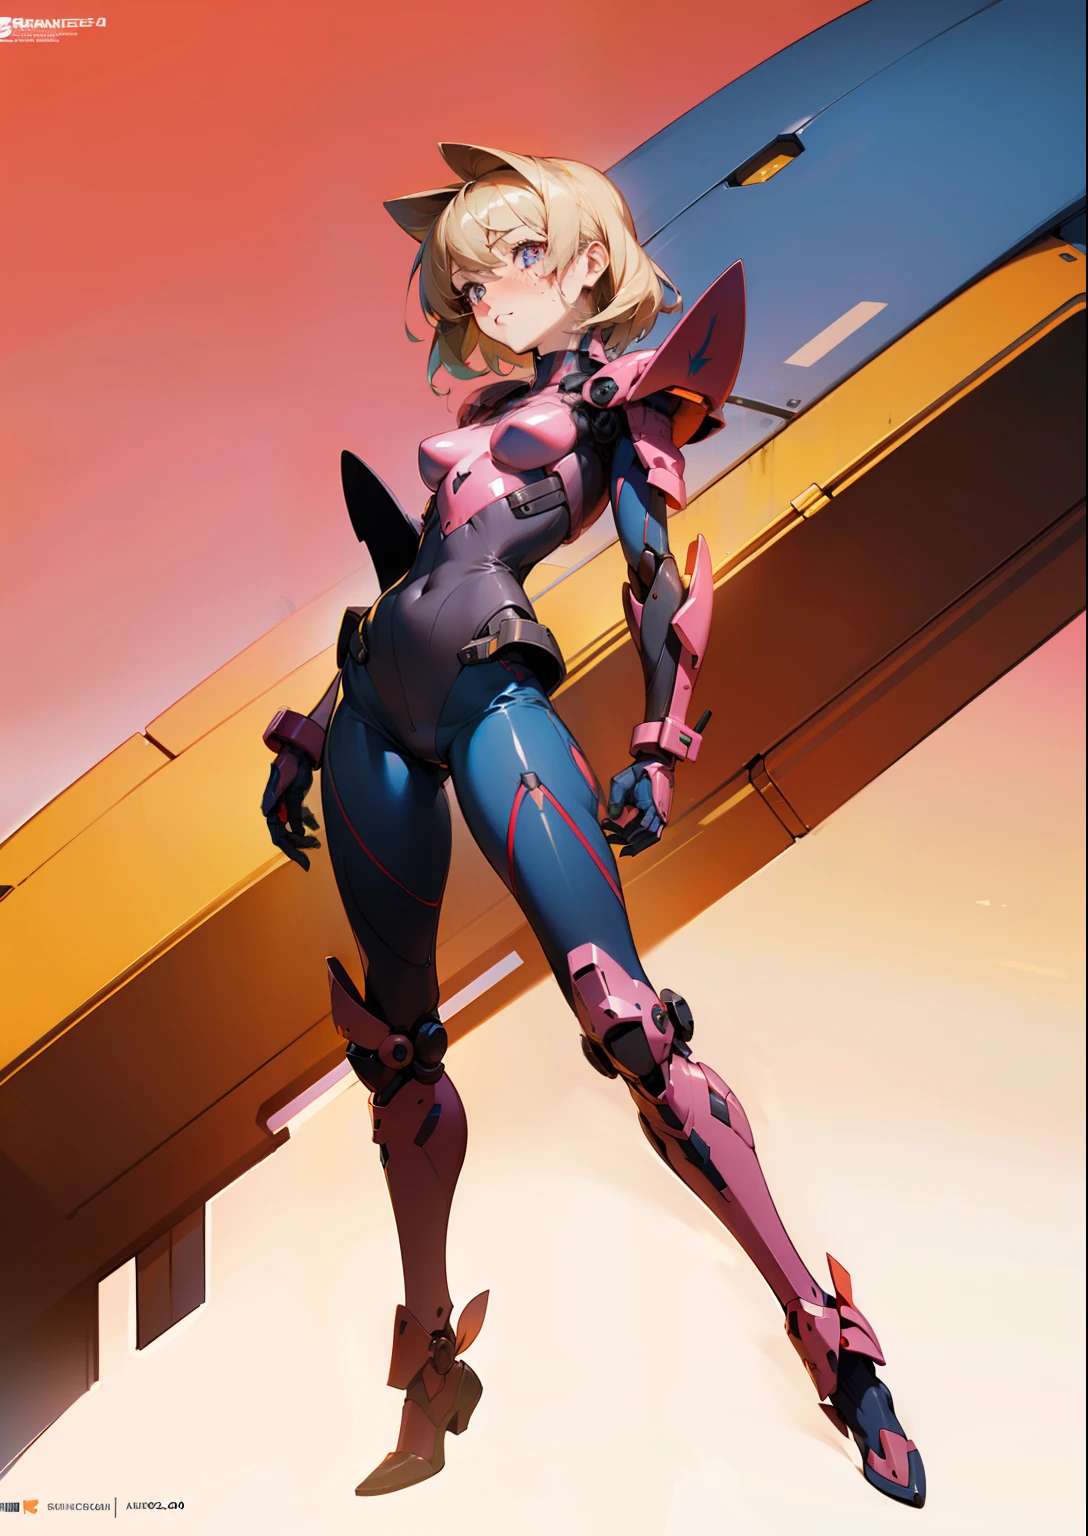 Octane Rendering,full view,8k --niji 5, (best quality, masterpiece, ultra-realistic), portrait of 1 beautiful girl, (head to toe full body image), 1girls, solo, (Bubblegum Crisis style body armor: 2.0), (Knight Saber body armor), female shape, robotic exoskeleton, sleek design, futuristic, late 90's anime style, smooth lines, powered exoskeleton, extremely stylized, deviant art, masterpiece, highly detailed, detailed eyes, expressive detailed eyes, detailed pupils, futuristic, blush, small breasts, lots of freckles, super textured detailed skin, entire body image, full body shot, Bubblegum Crash anime,